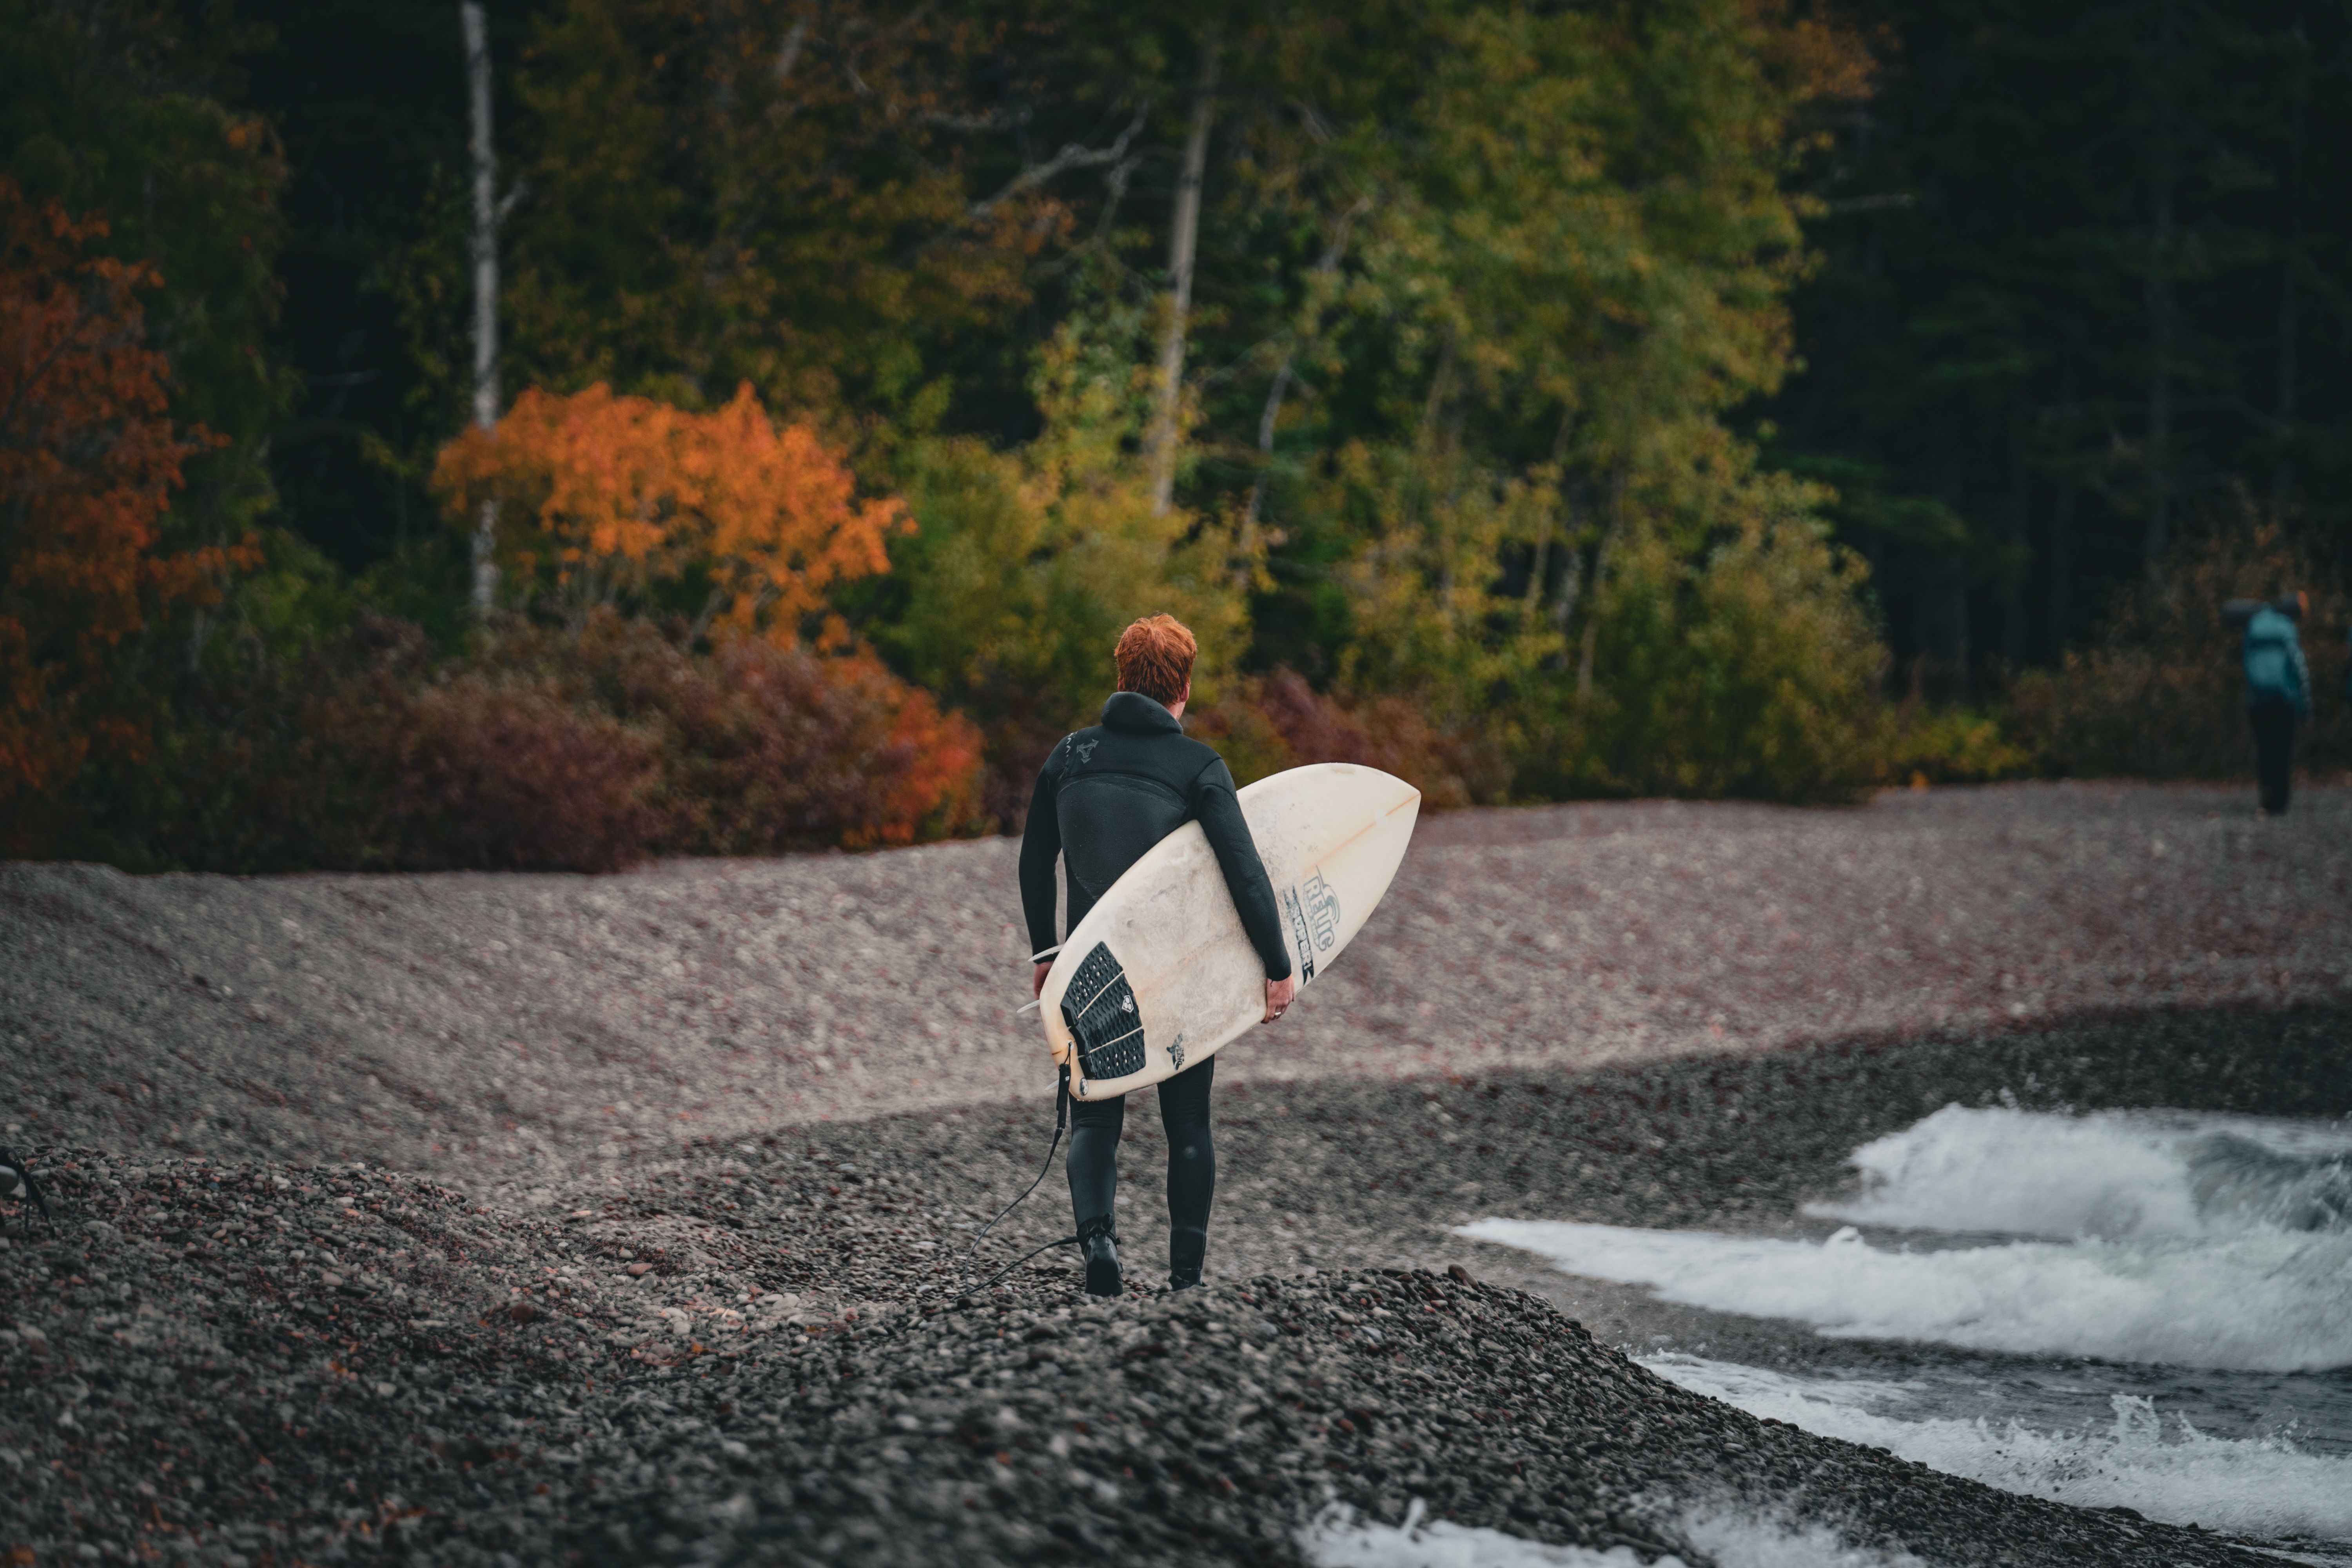 A person in a black wetsuit walking on a rocky lakeshore, holding a surfboard. There are orange and green autumn leaves in the background.